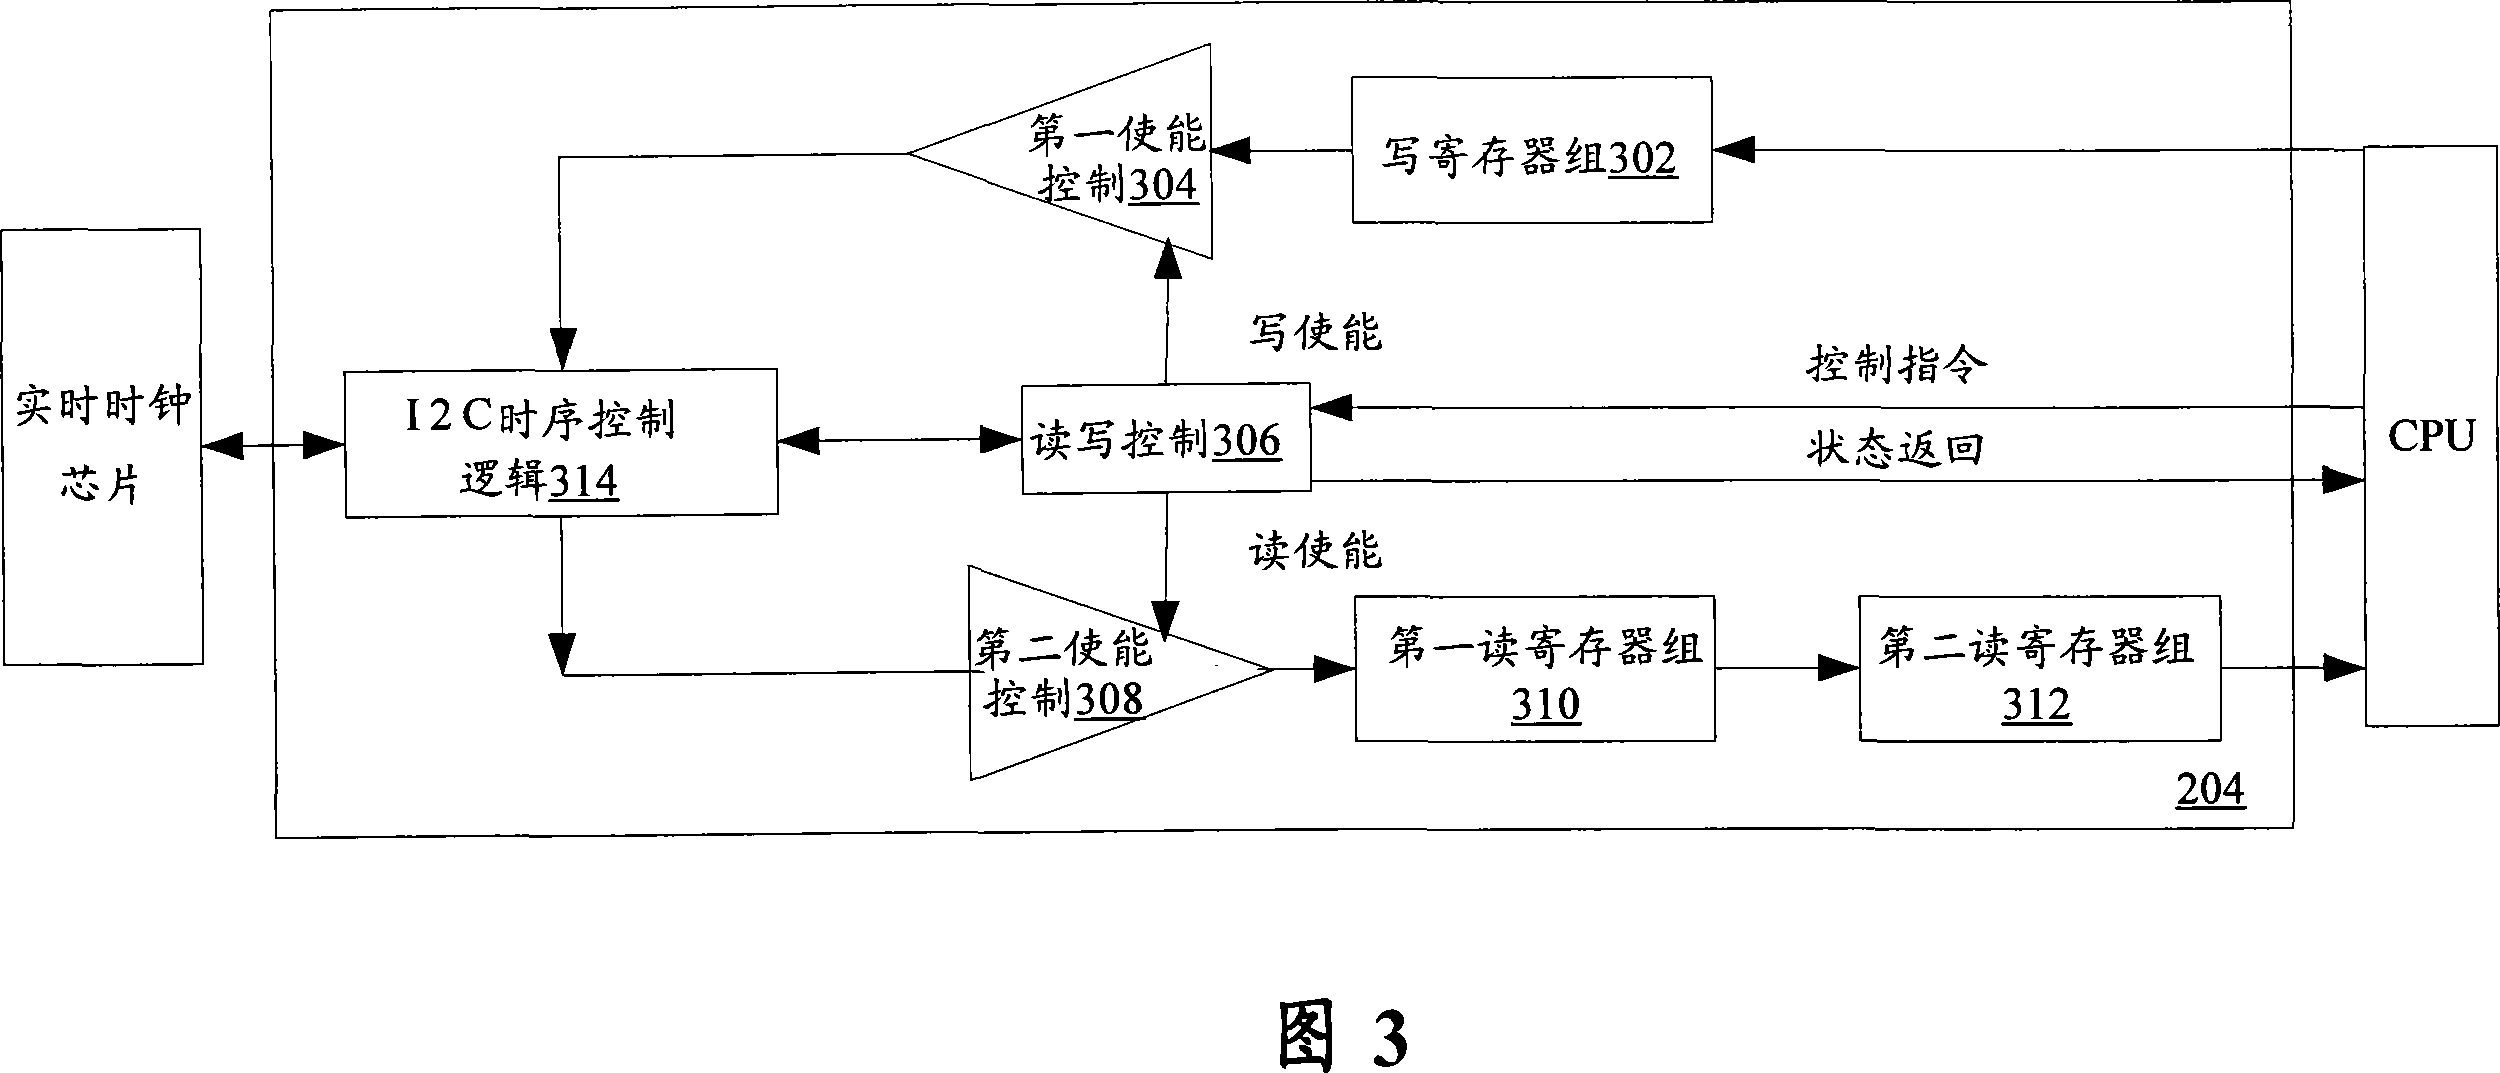 Real-time timepiece chip interface circuit control method and real-time timepiece control circuit